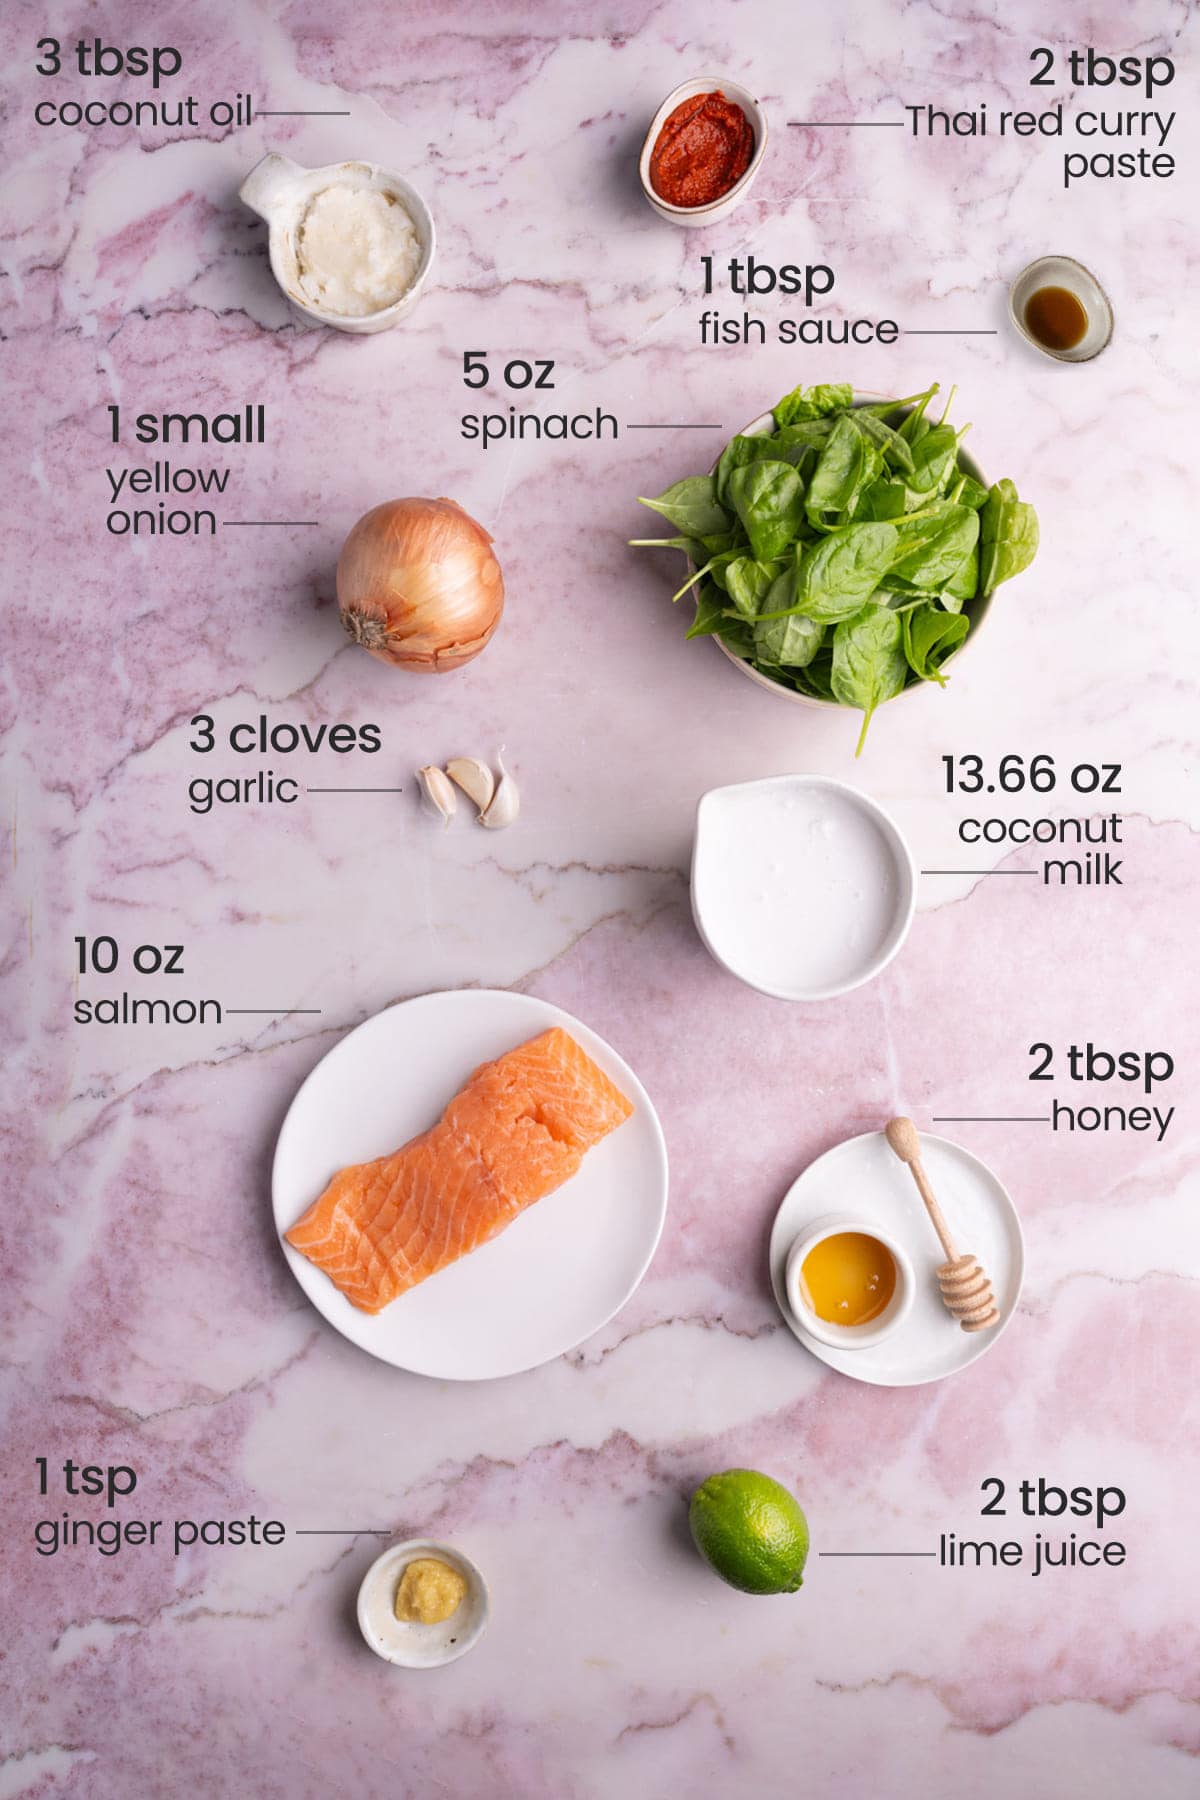 all ingredients for Salmon Coconut Curry - coconut oil, spinach, Thai red curry paste, fish sauce, sweet onion, garlic, coconut milk, salmon, honey, ginger paste, lime juice